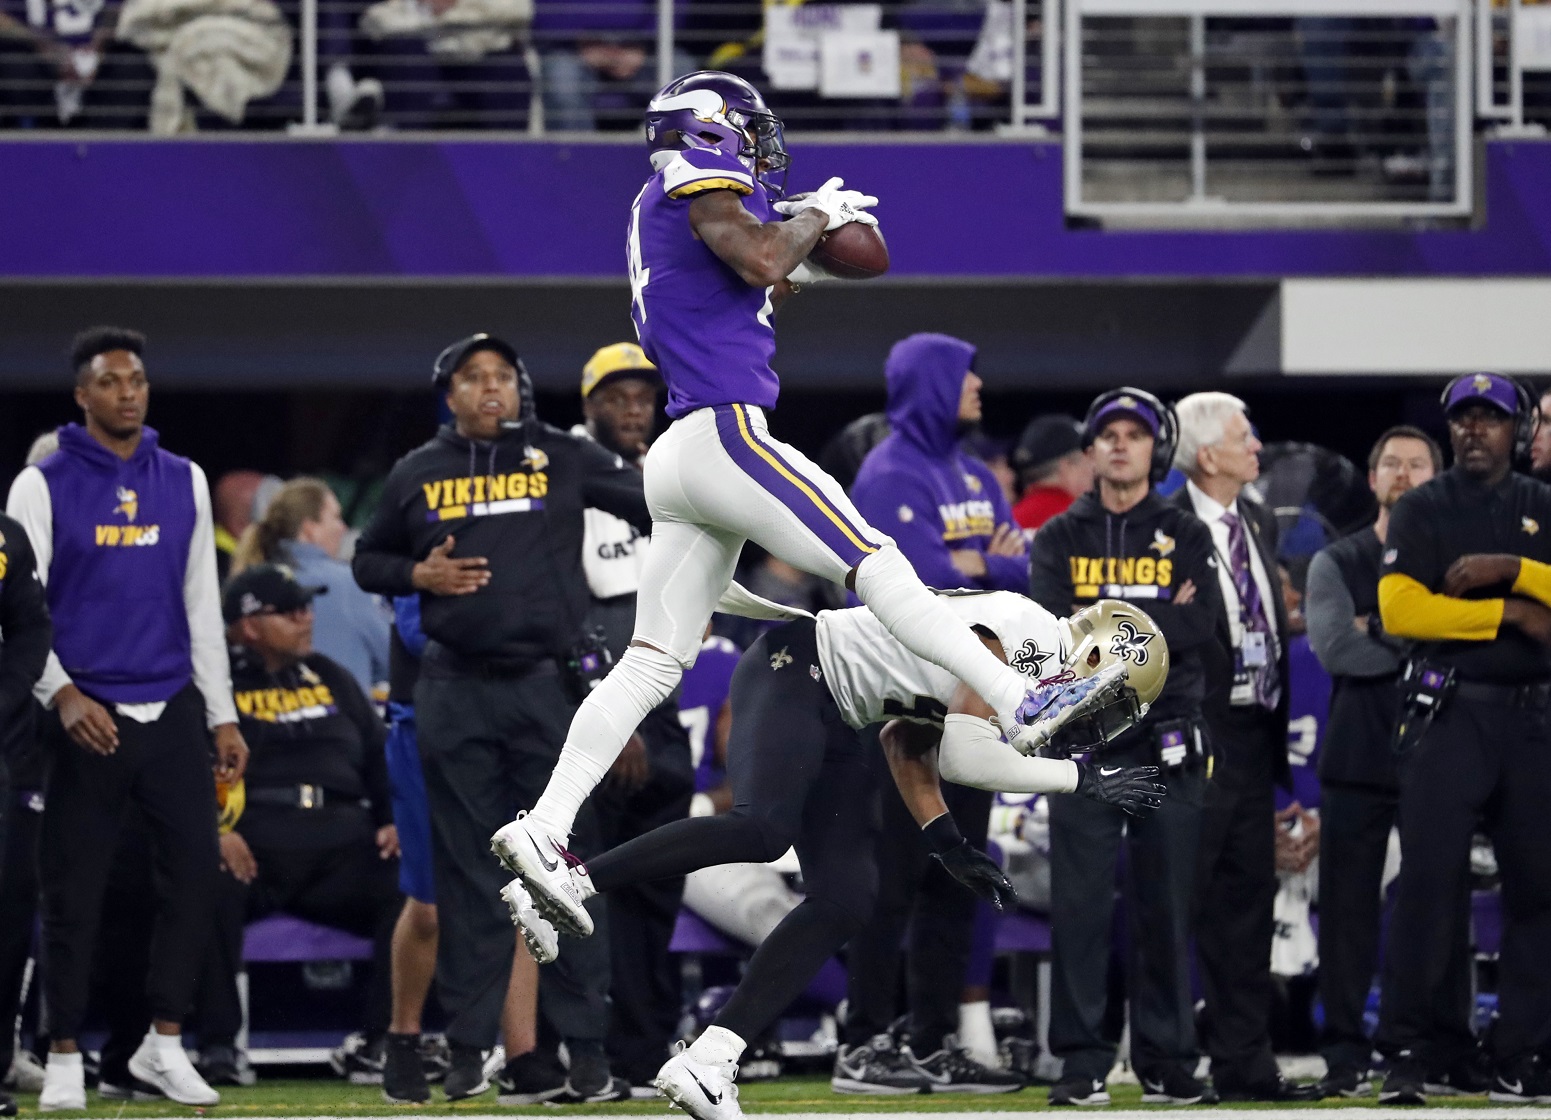 Eagles, Vikings stage NFC championship rematch Sunday